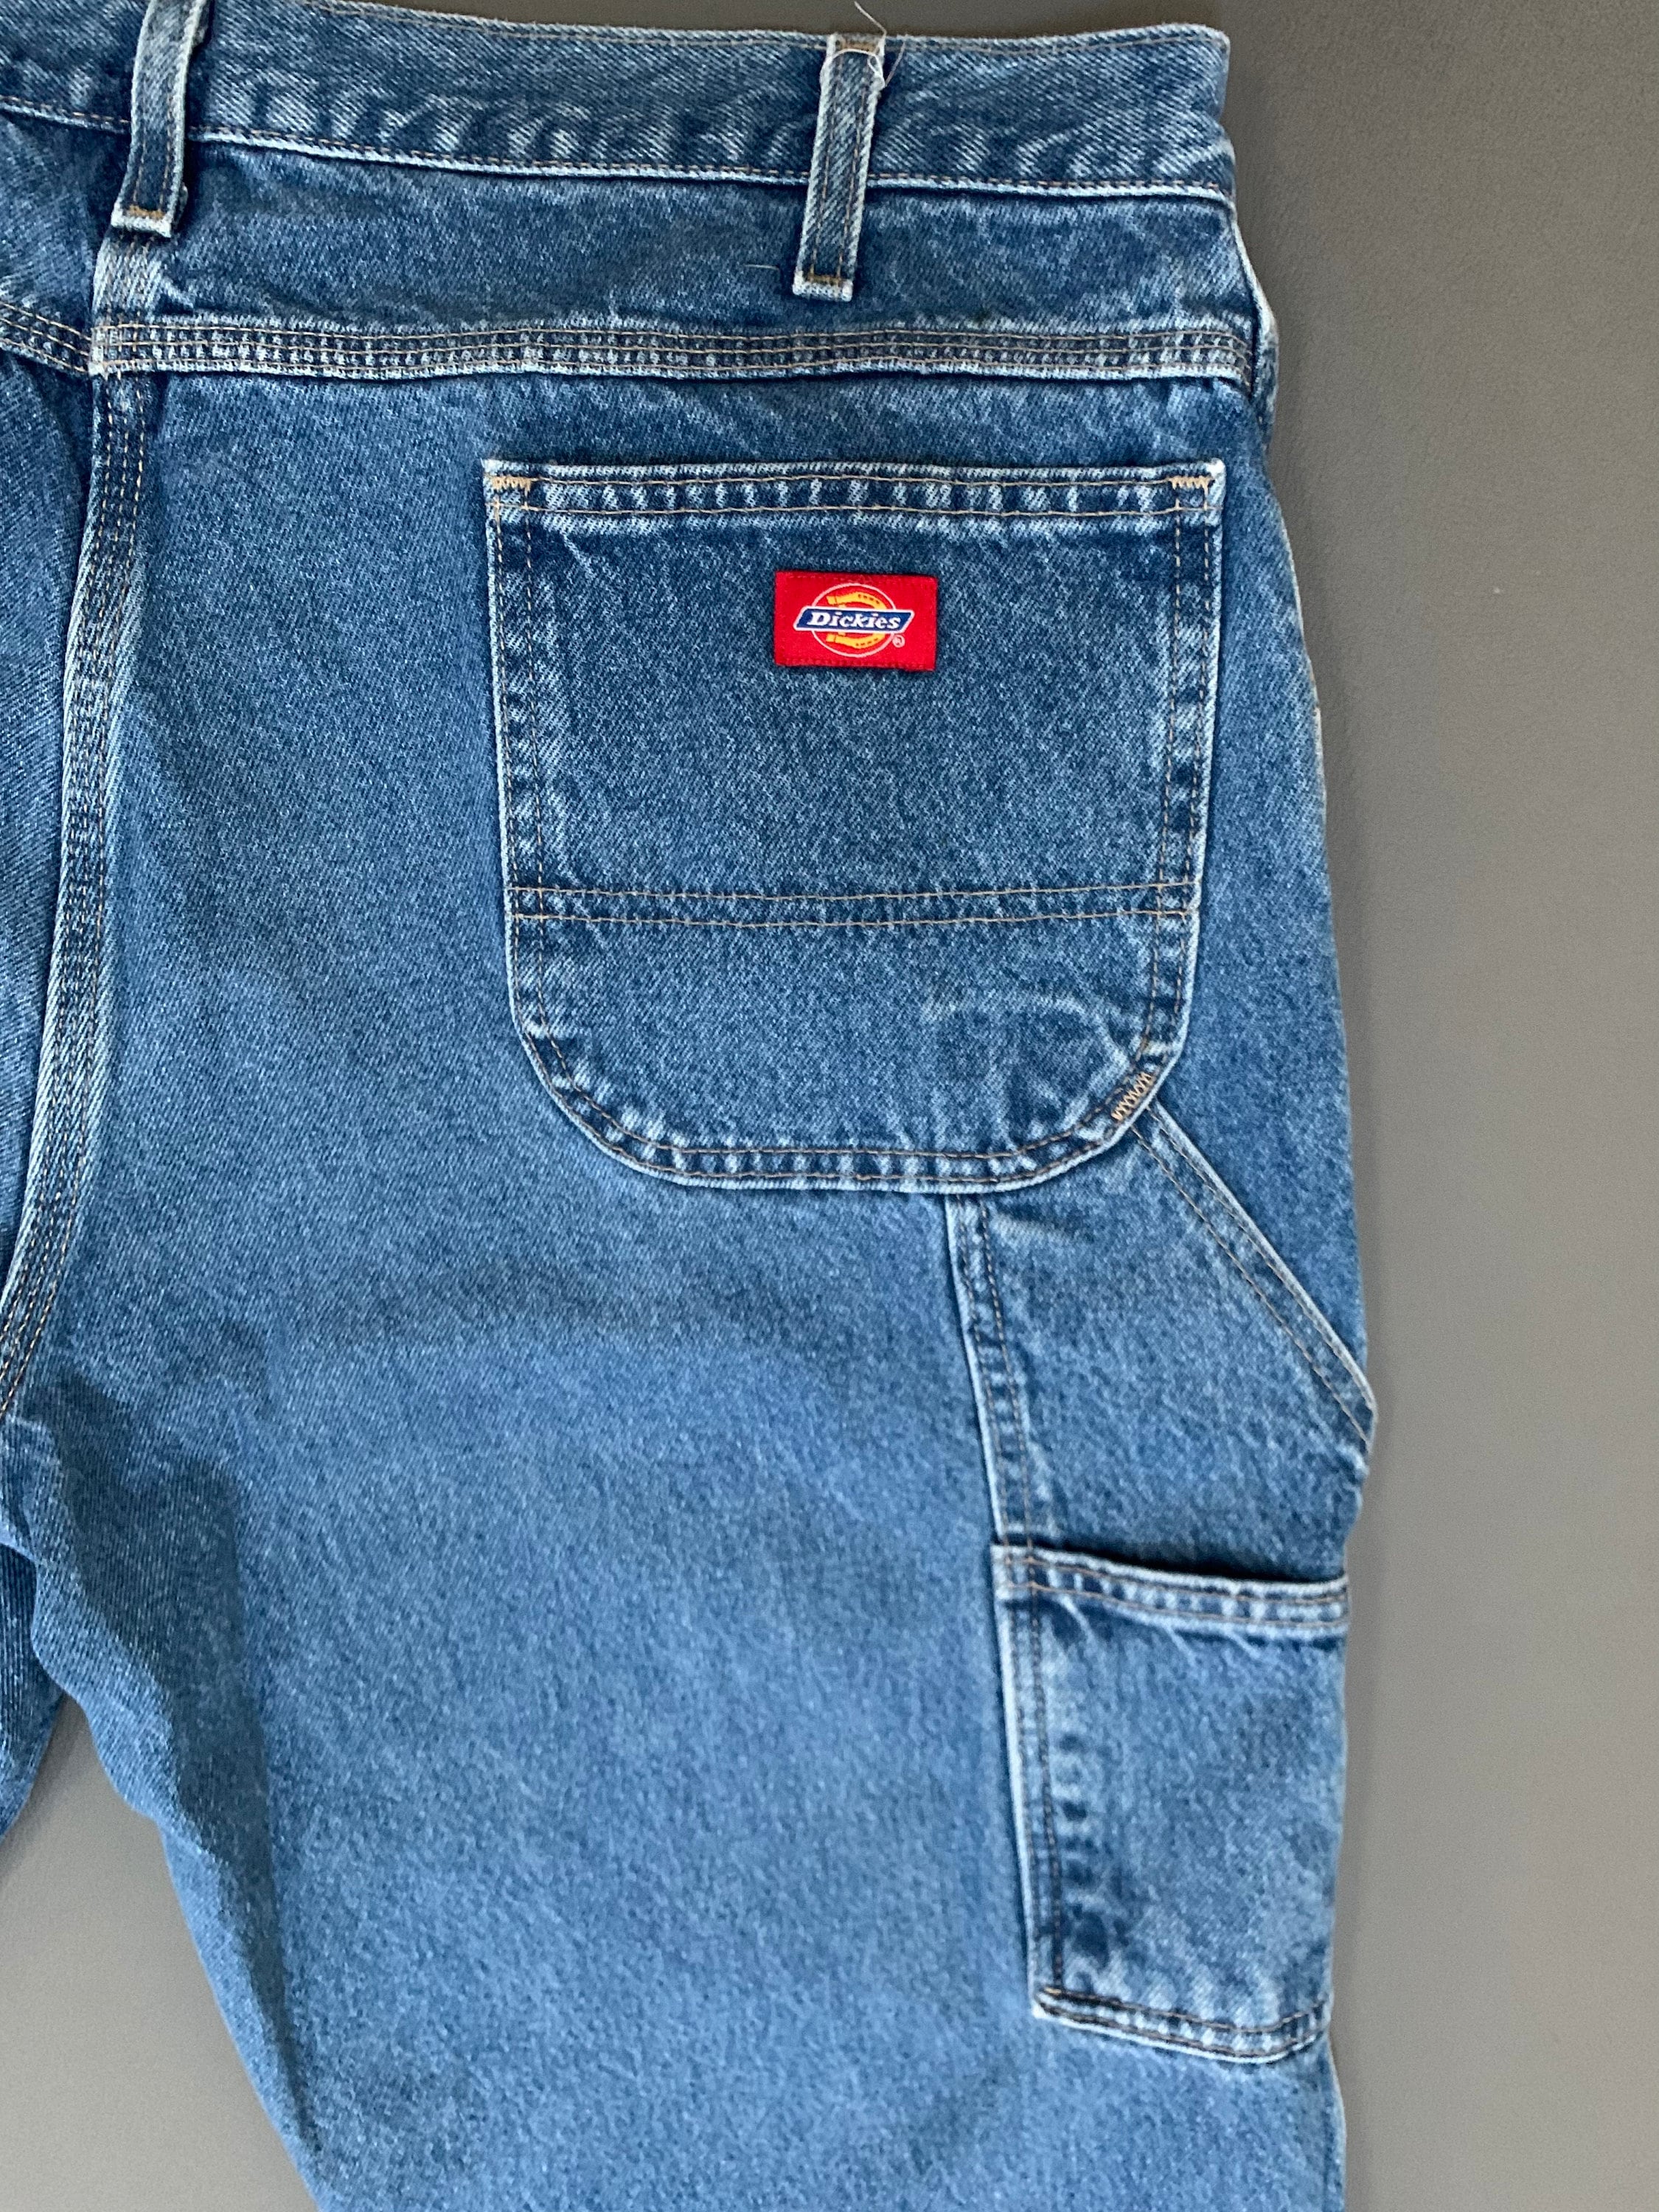 Vintage Dickies Carpenter Jeans, Size 40 -  Canada